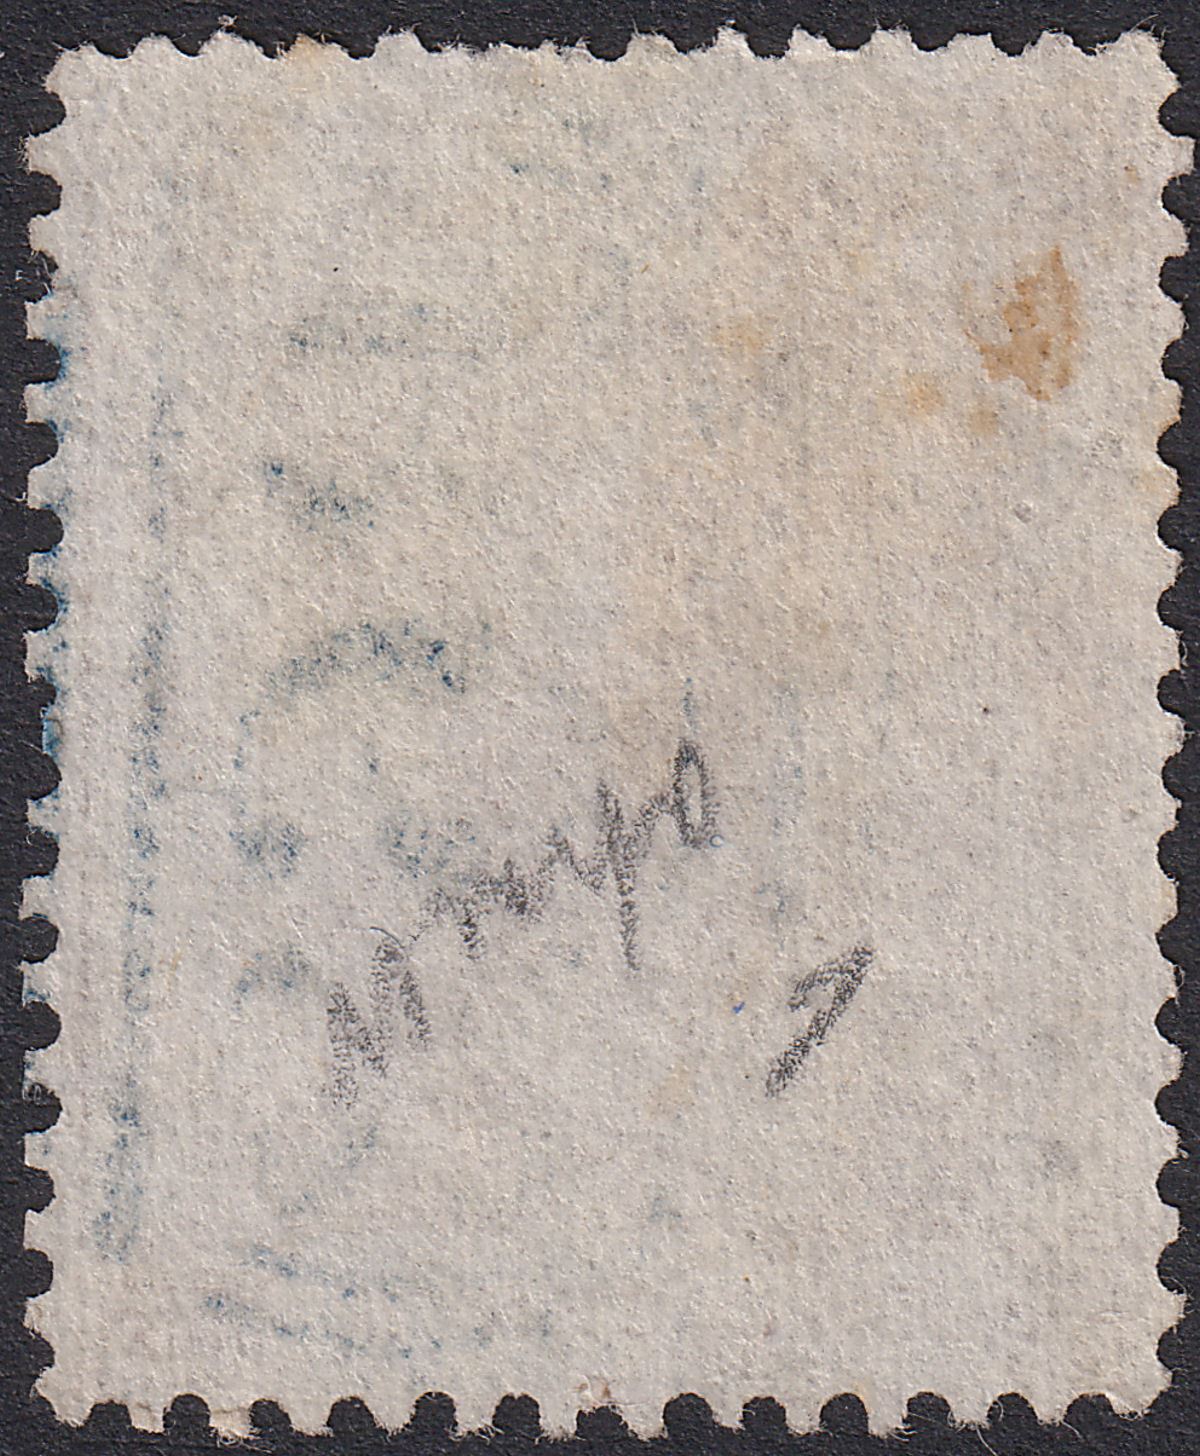 Hong Kong 1862 QV 2c Brown Used SG1 cat £120 with Blue B62 Postmark